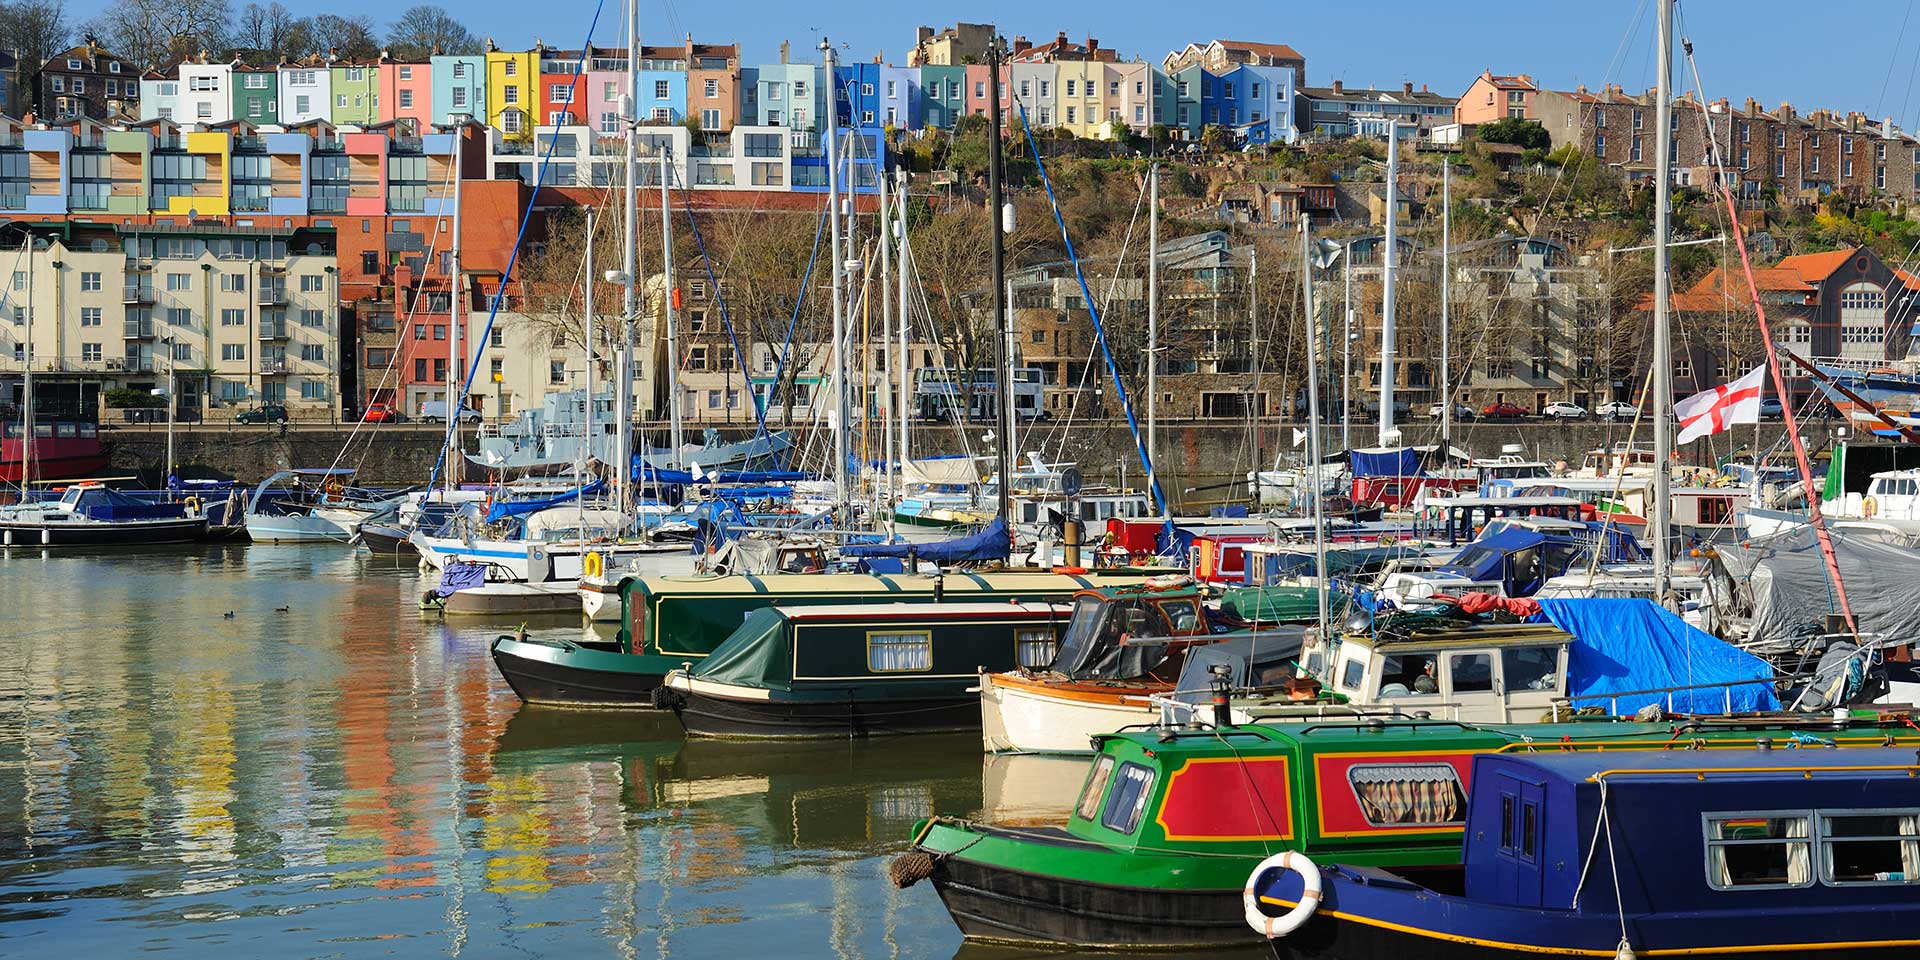 Bristol Harbor with its famous colorful buildings in the backdrop